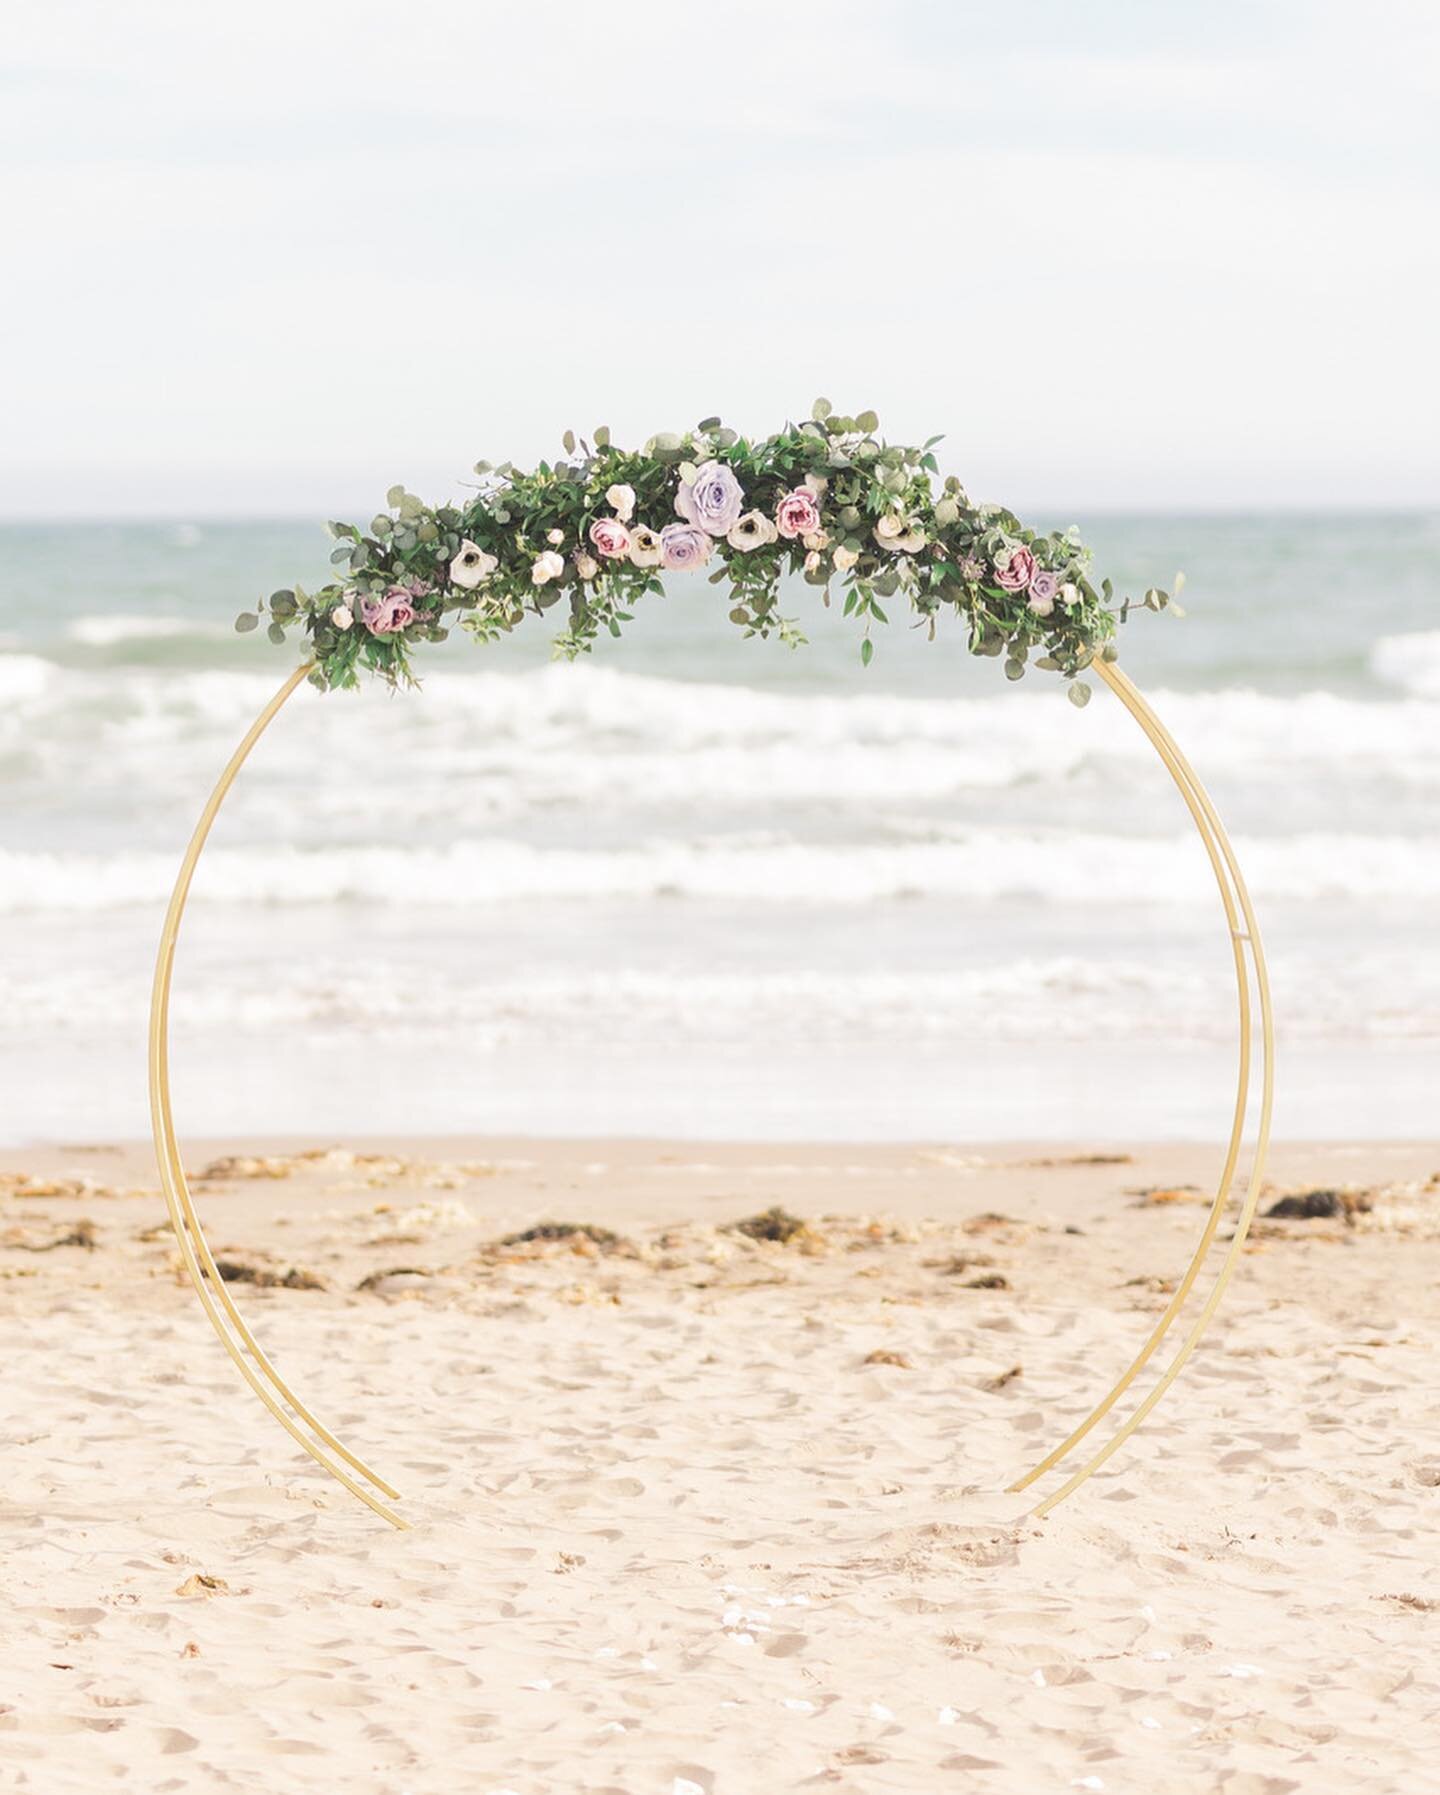 As a wedding planner, it's always an honor to witness the love between two people on their special day. This elopement on Conrad's beach was so special - the stunning scenery, the intimate atmosphere, and the happy couple made for a truly unforgettab